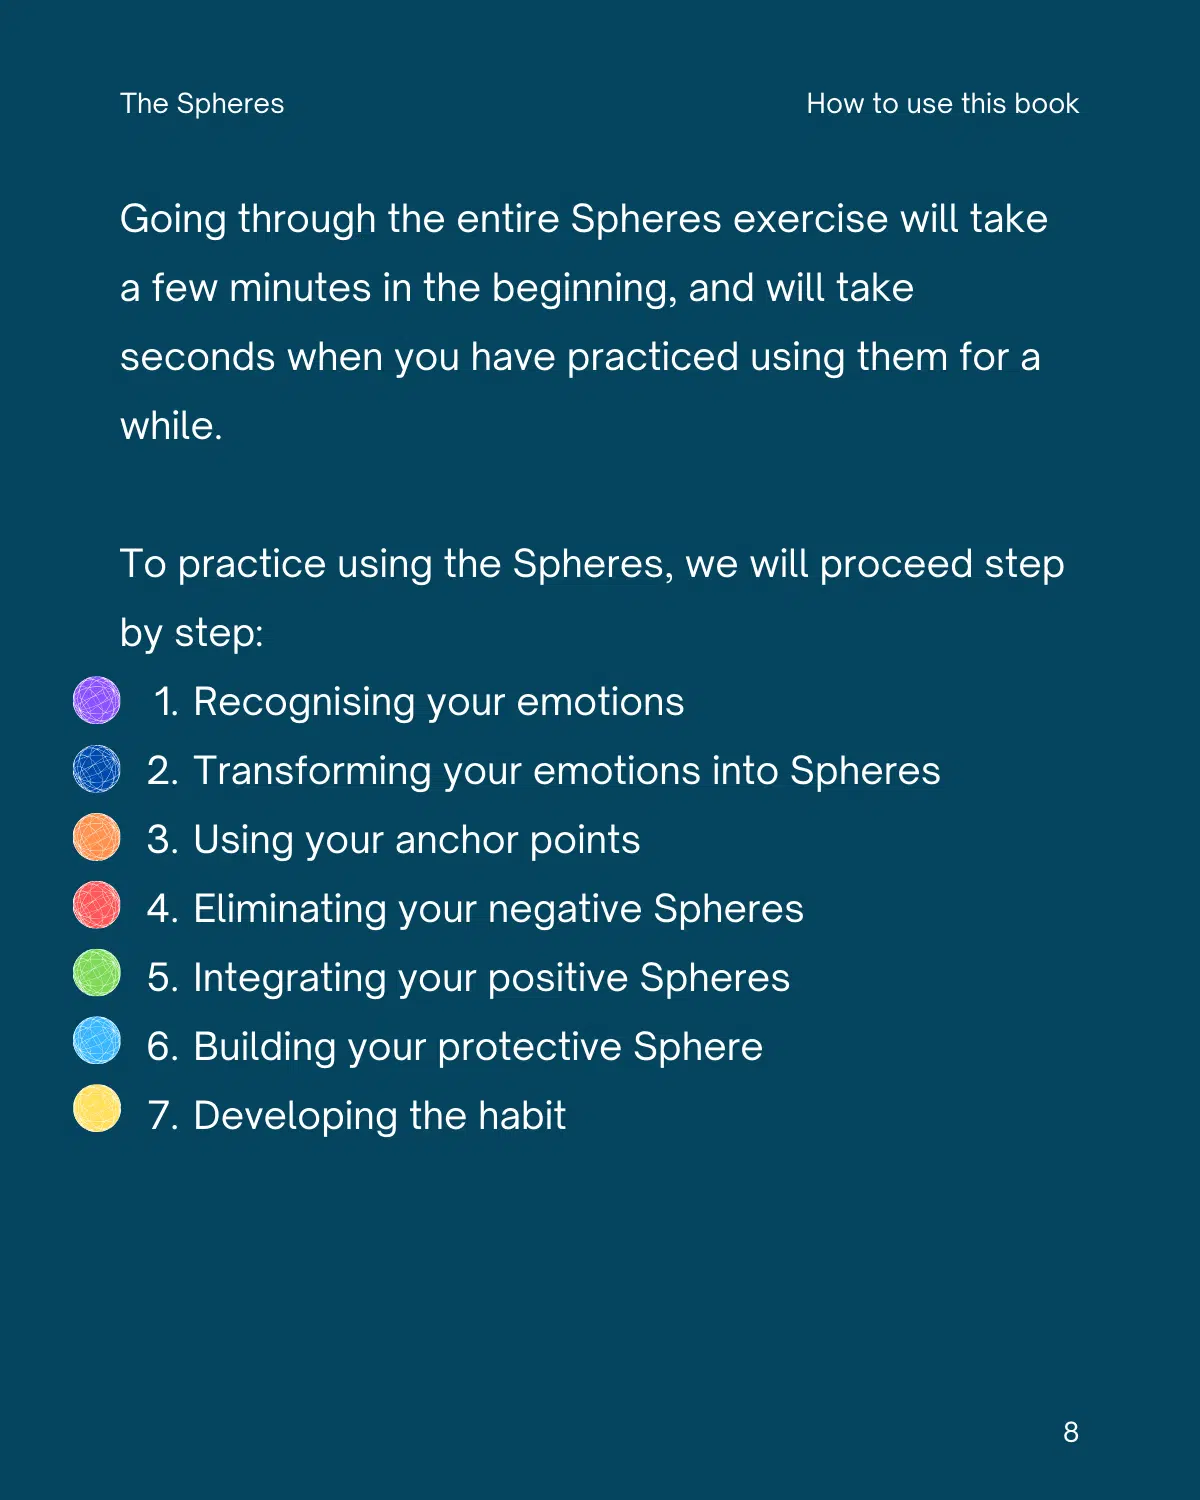 The Spheres - How to use this book